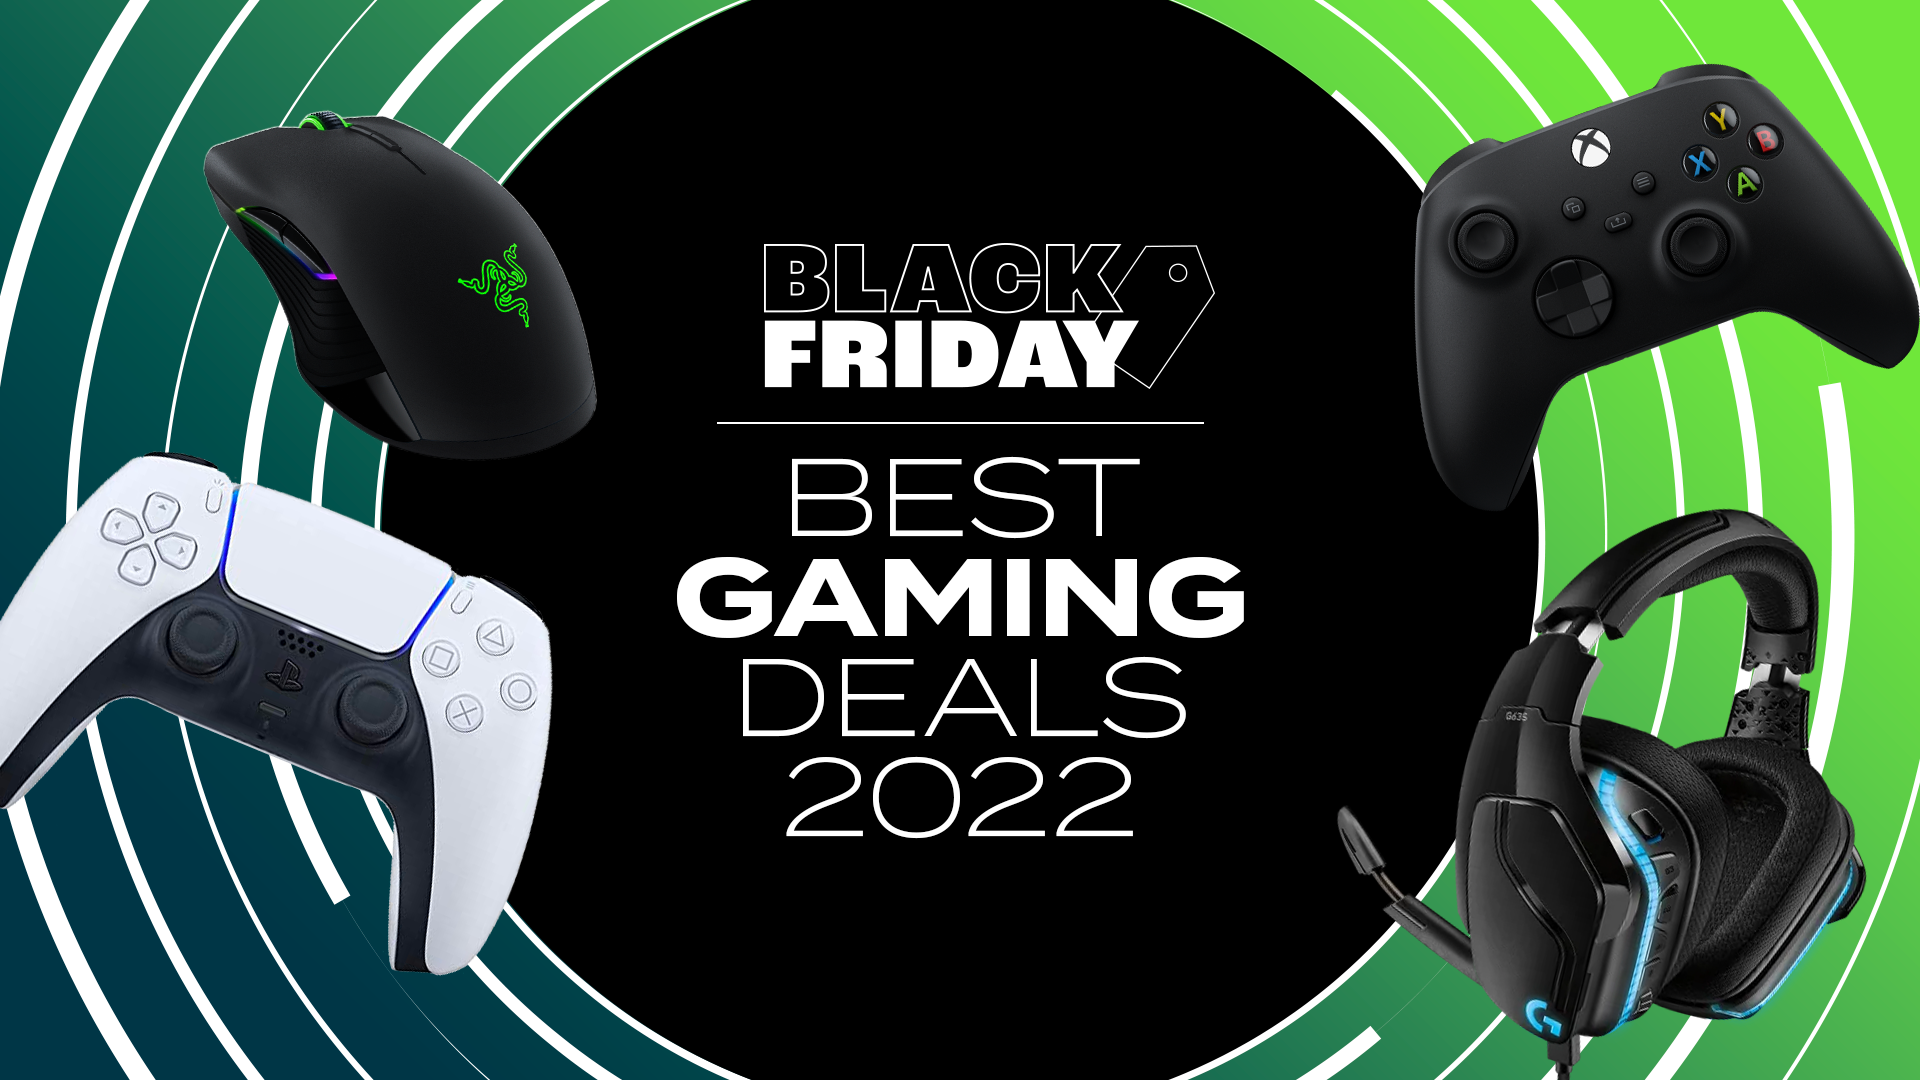 Black Friday gaming deals 2022: best early sales | Eurogamer.net - Will Fossil Have Black Friday Deals